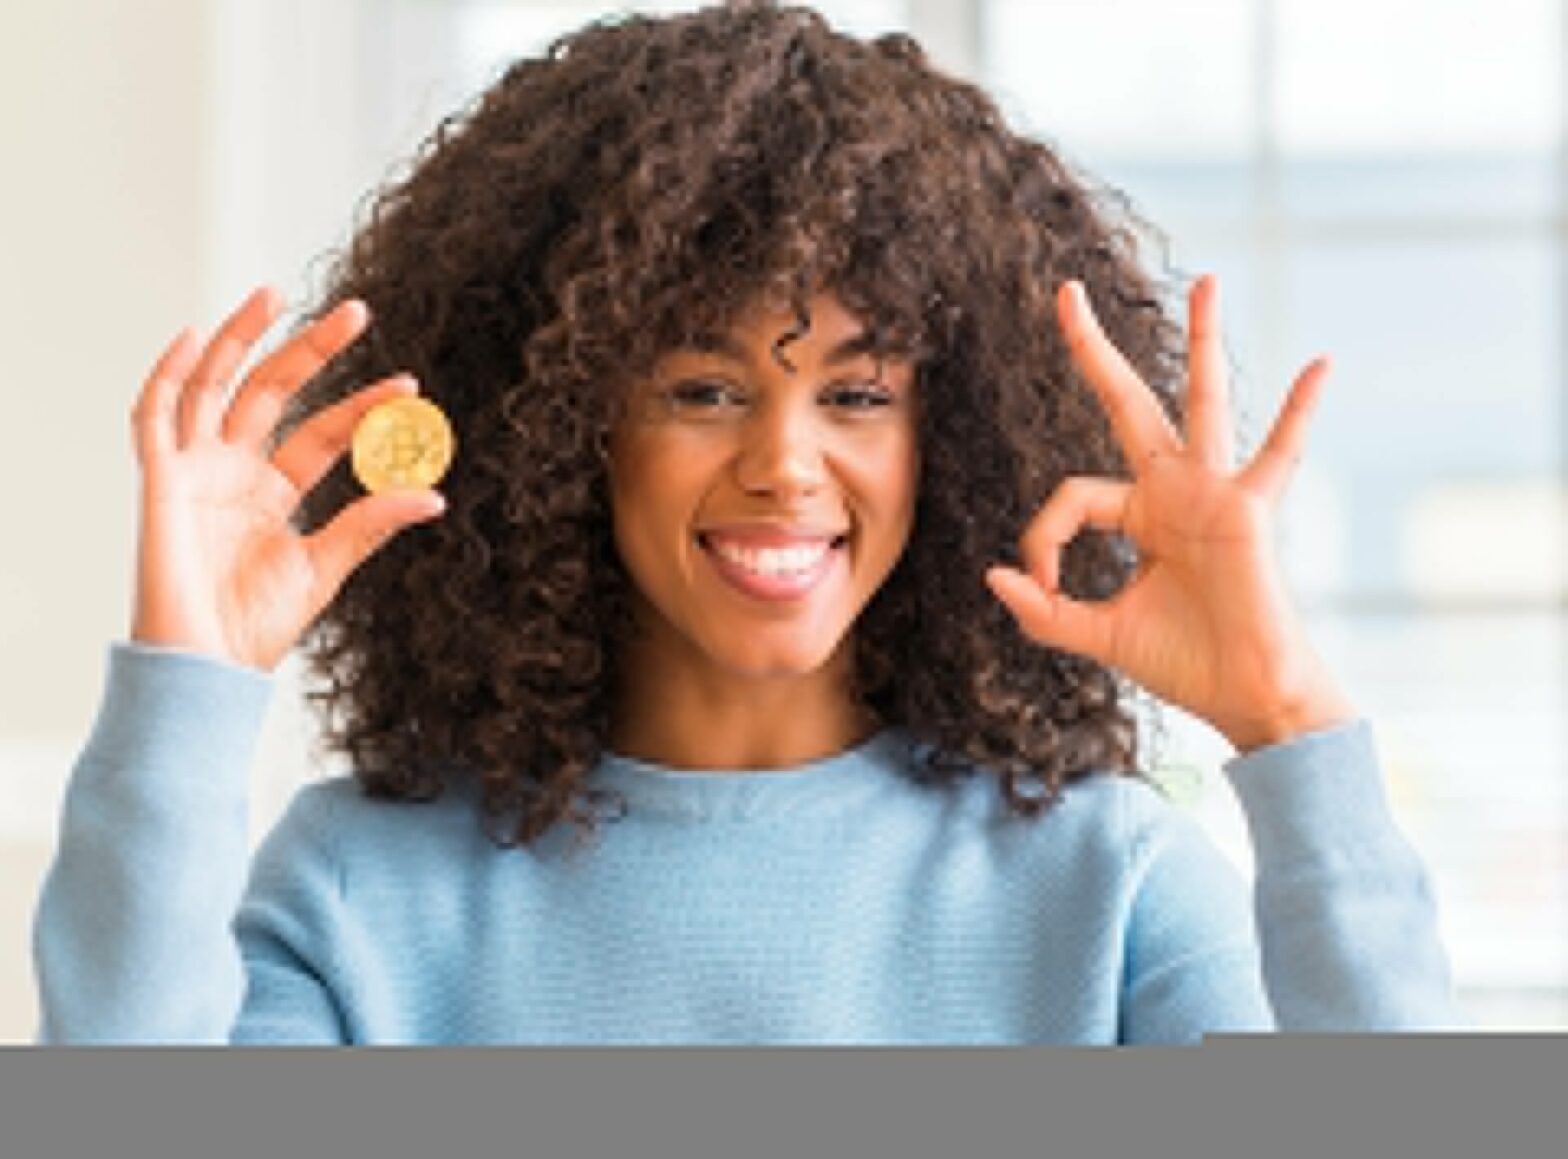 Woman holding bitcoin cryptocurrency